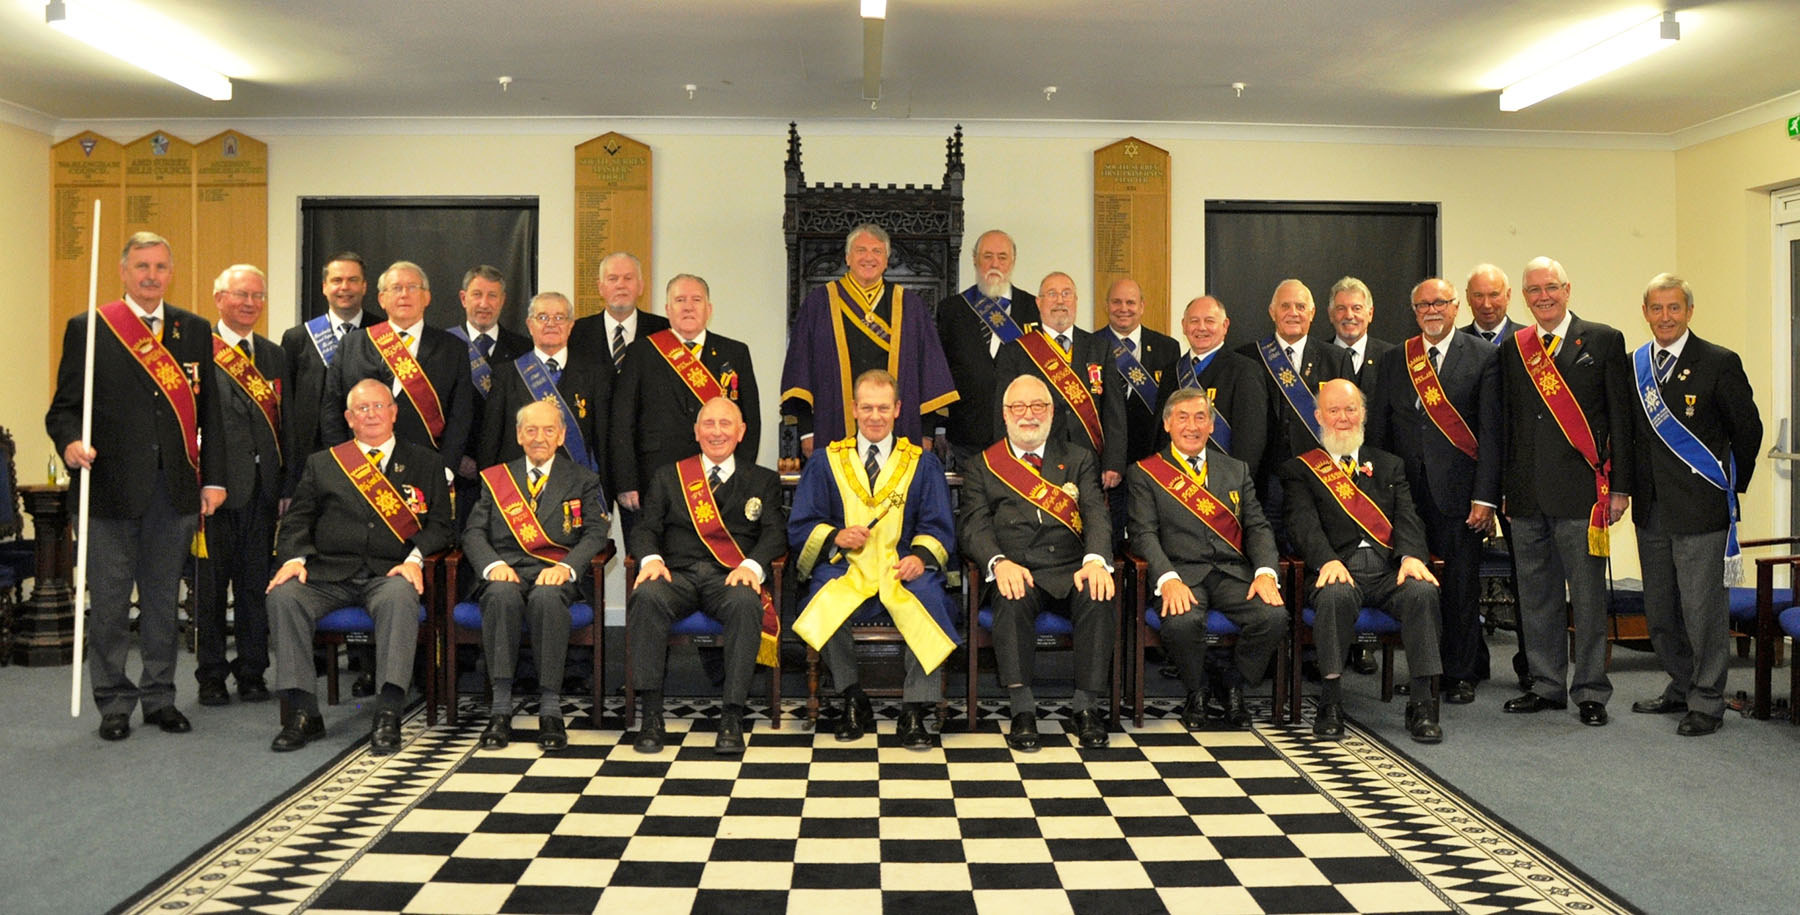 The Provincial Grand Supreme Ruler’s Visit to Warlingham Conclave